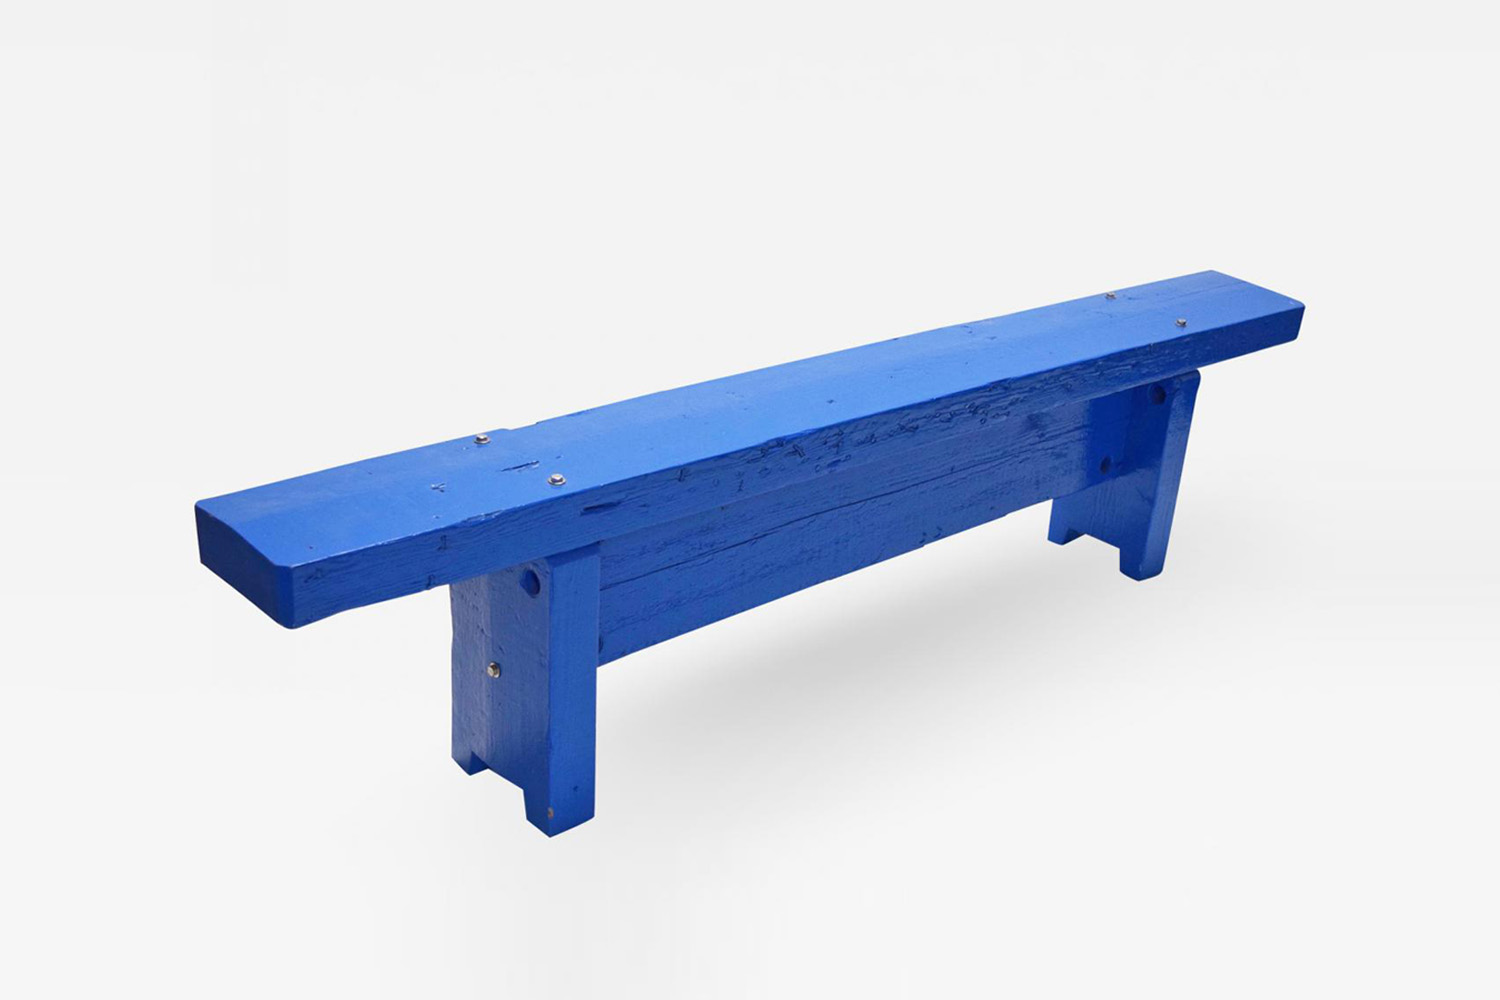 the bench at the foot of the bed is the piet hein eek one beam bench in blue; 12